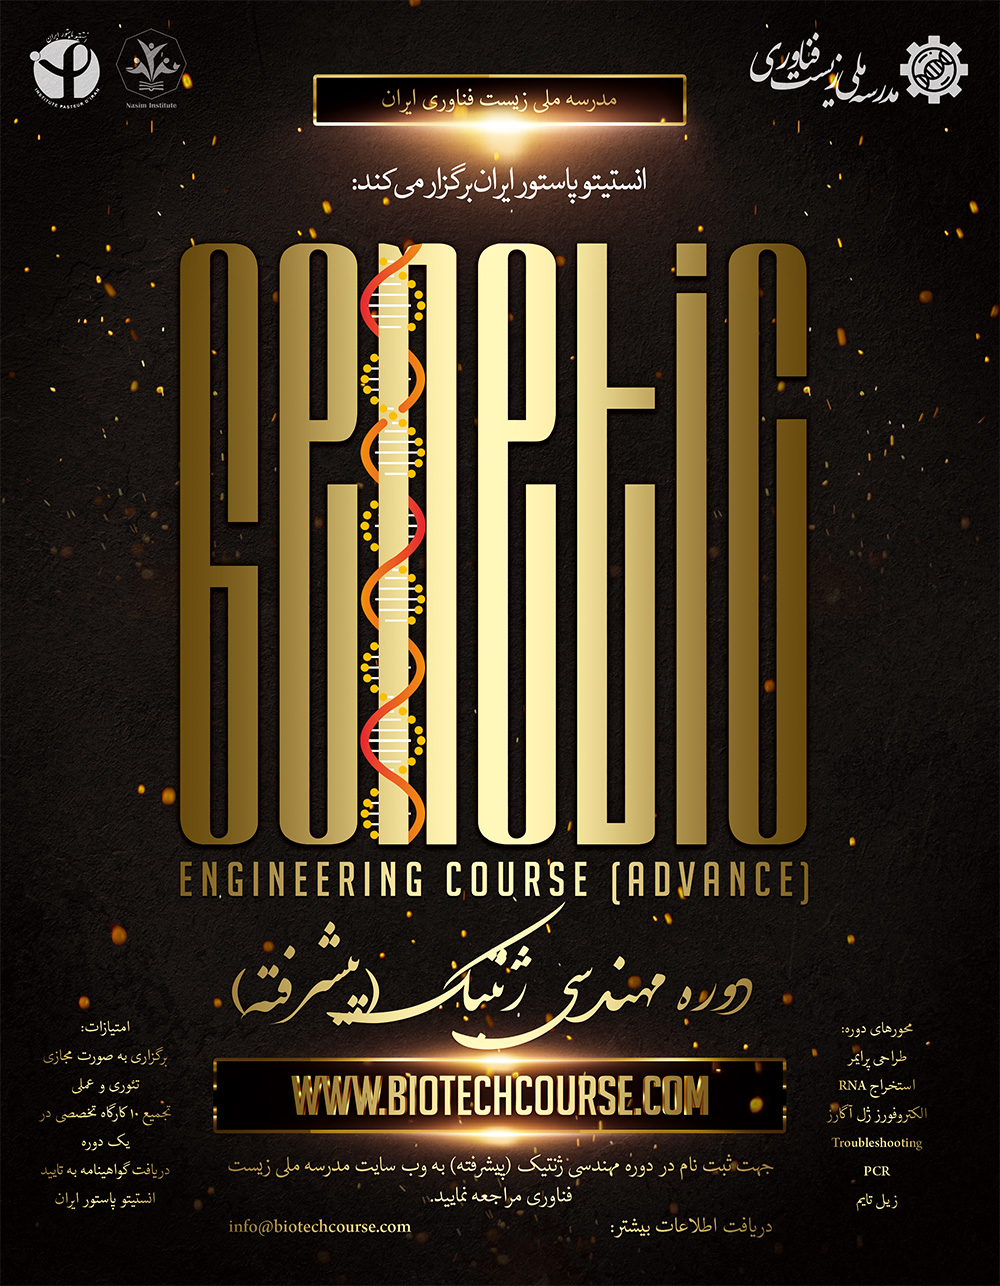 Genetic Engineering Course (Advanced Course)